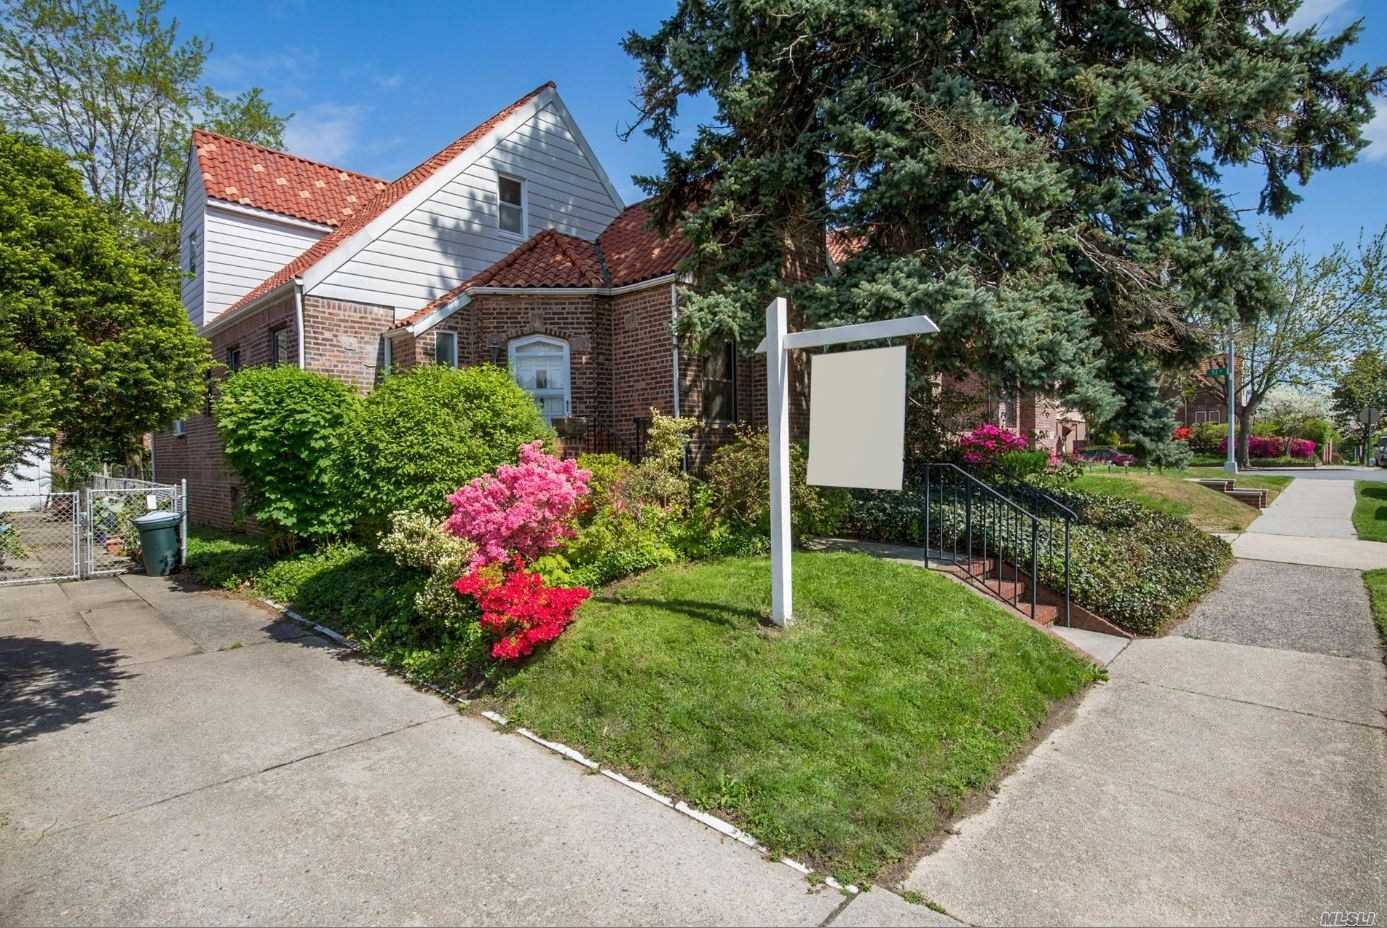 Welcome home to this brick tudor 1 family, vaulted celings and brick beams in lvingroom with firplace, large FDR, large kithen, master bedroom on 1st fl w/ add&rsquo;l bedroom, 2nd fl-3 bdrms, 1 bath, large attic, full basement, 1.5 car garage, private yard. Home needs TLC.